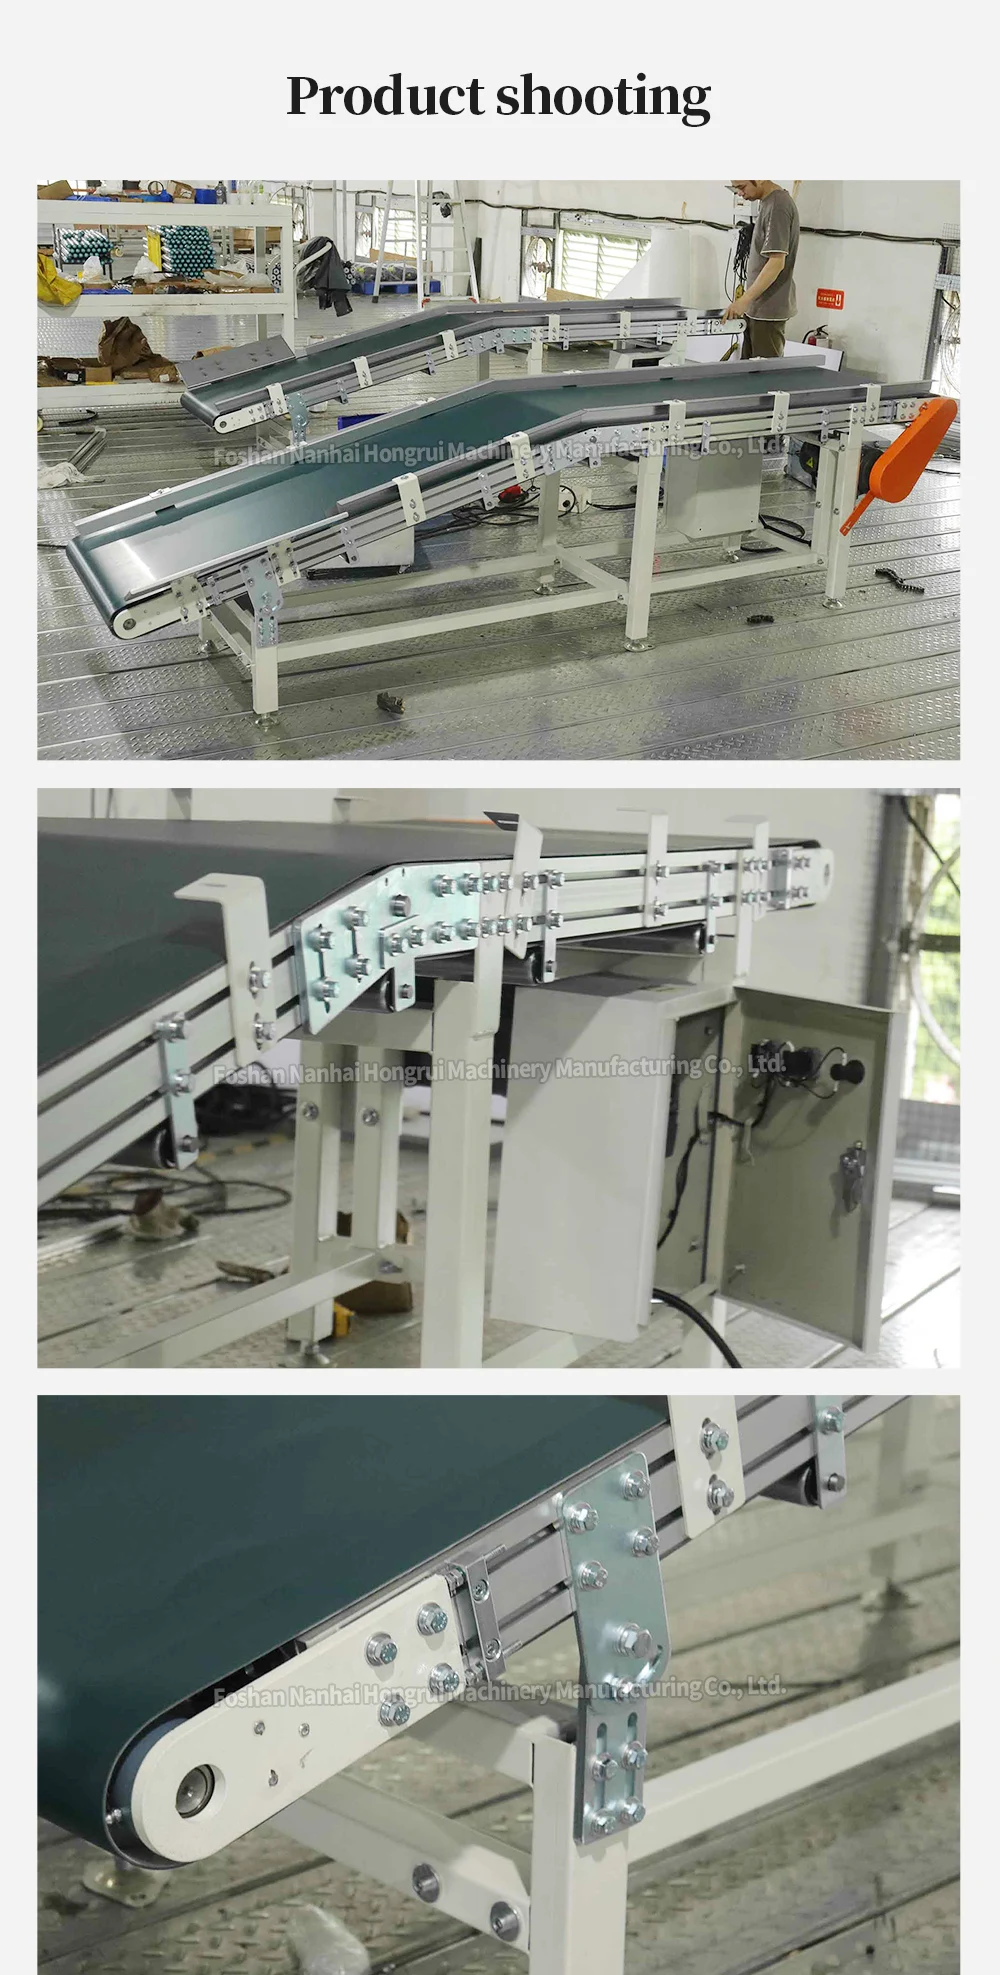 Efficient Industrial Incline Conveyor Automation Equipment for Improved Workflow details